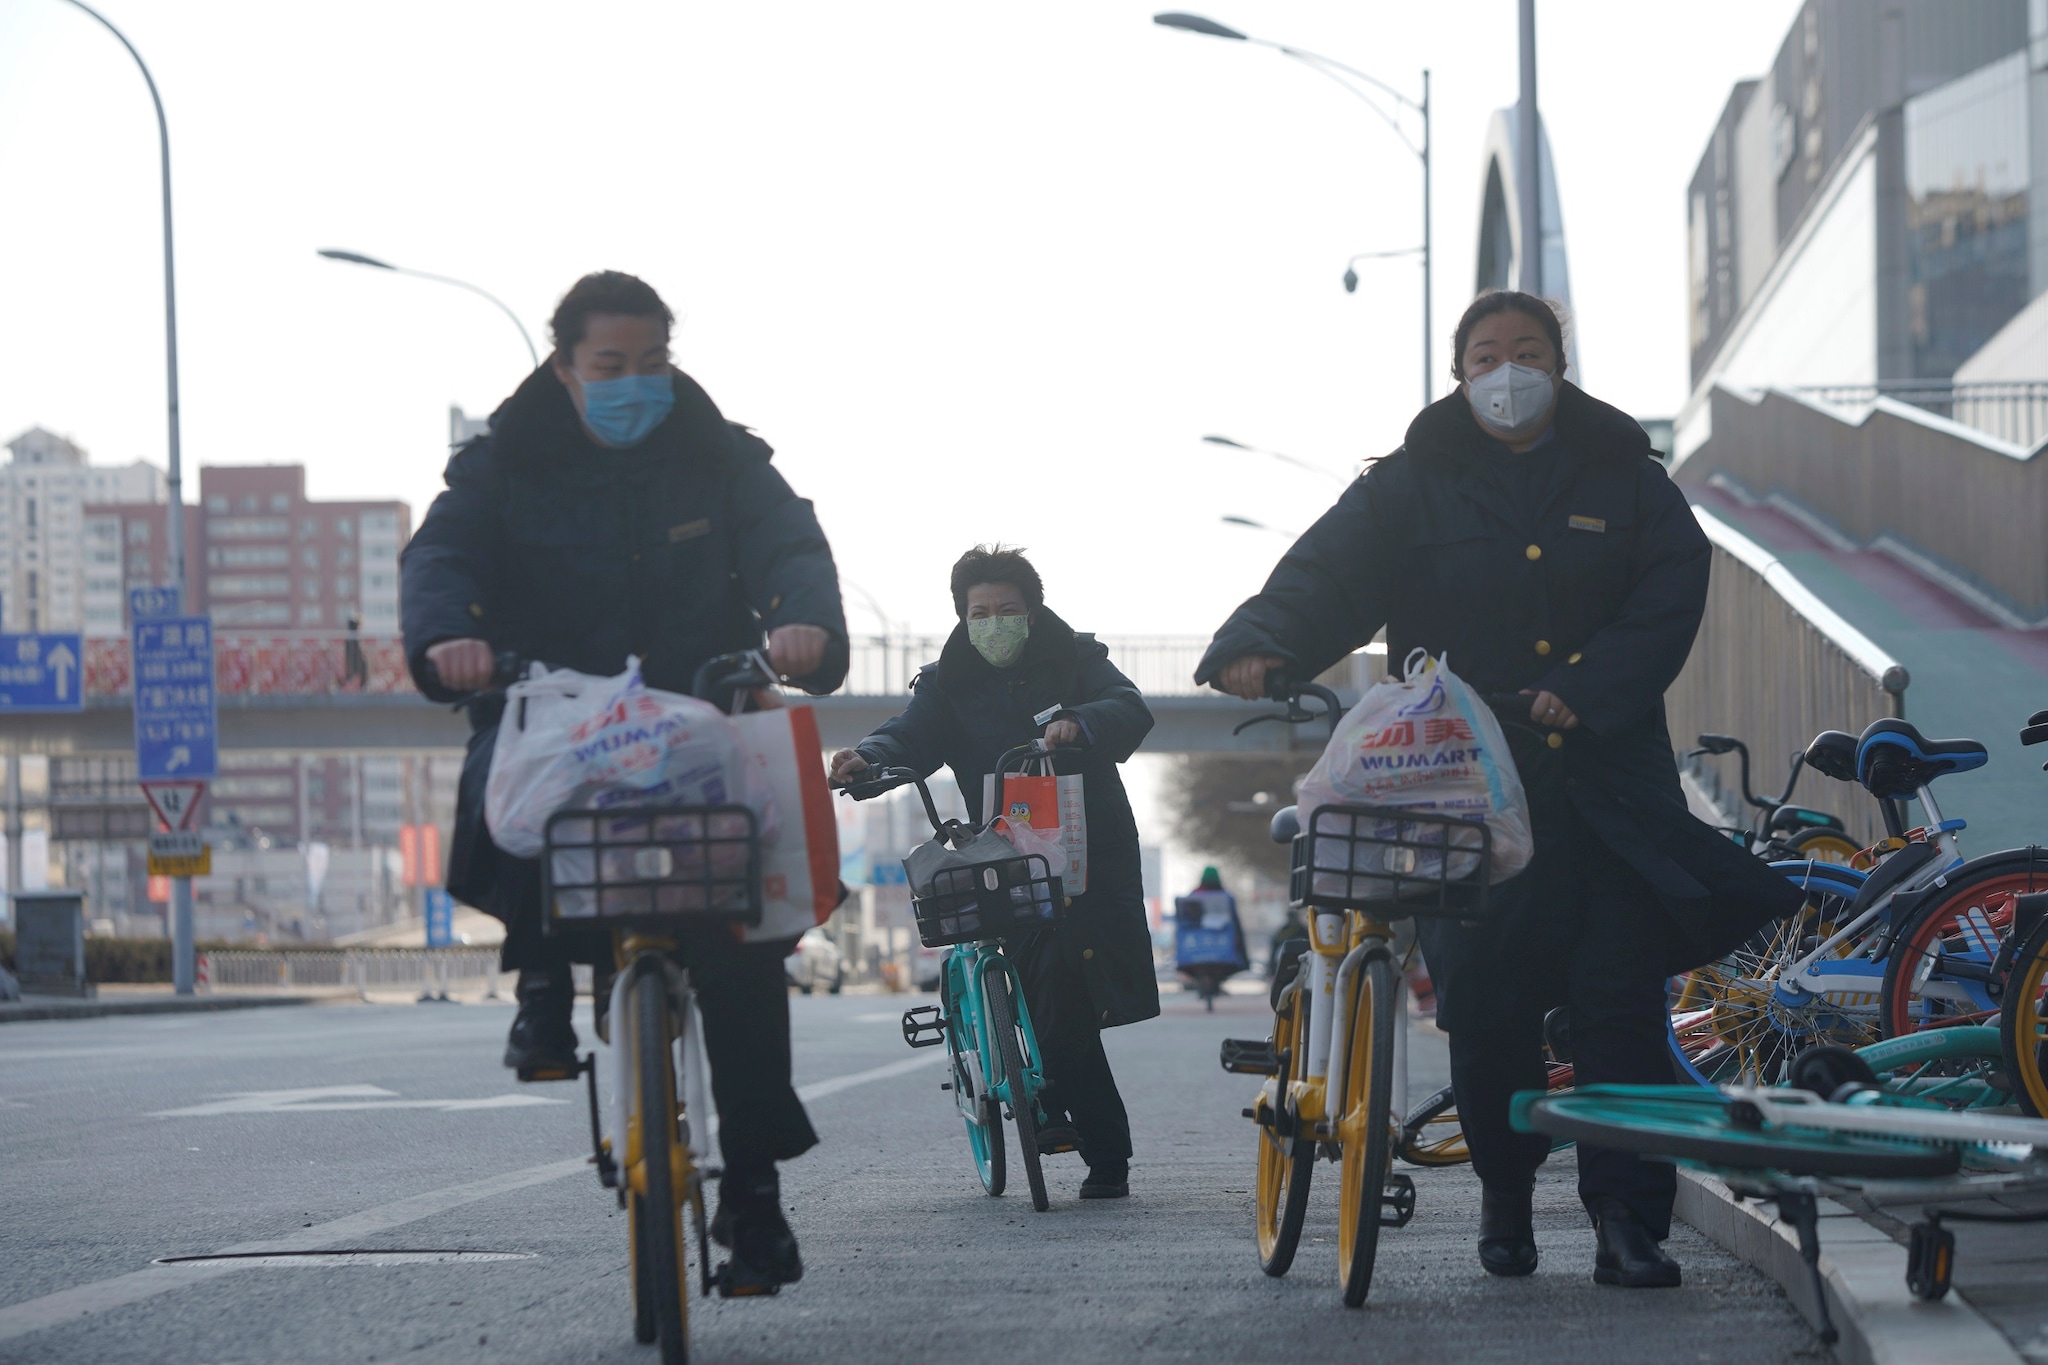 Women wearing face masks ride shared bicycles, as the country is hit by an outbreak of the novel coronavirus, in Beijing, China February 15, 2020. REUTERS/Stringer